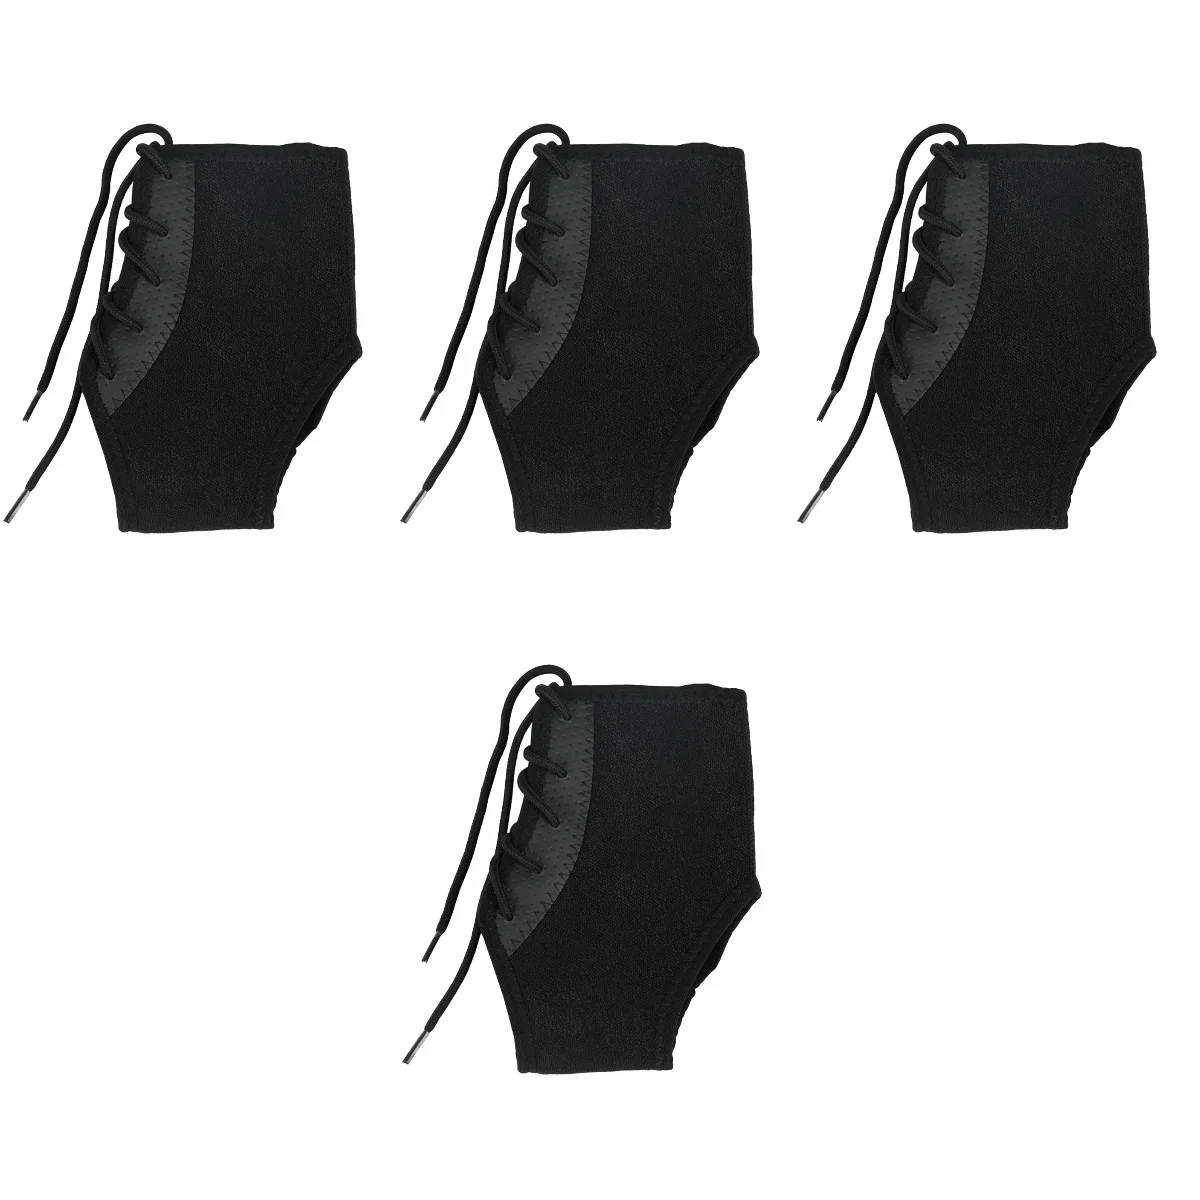 

4 Pieces Foot Arch Supports Ankle Brace Men Sports Support Braces Arch Foot 17.2x9cm Shoes Women Black Neoprene Sleeve